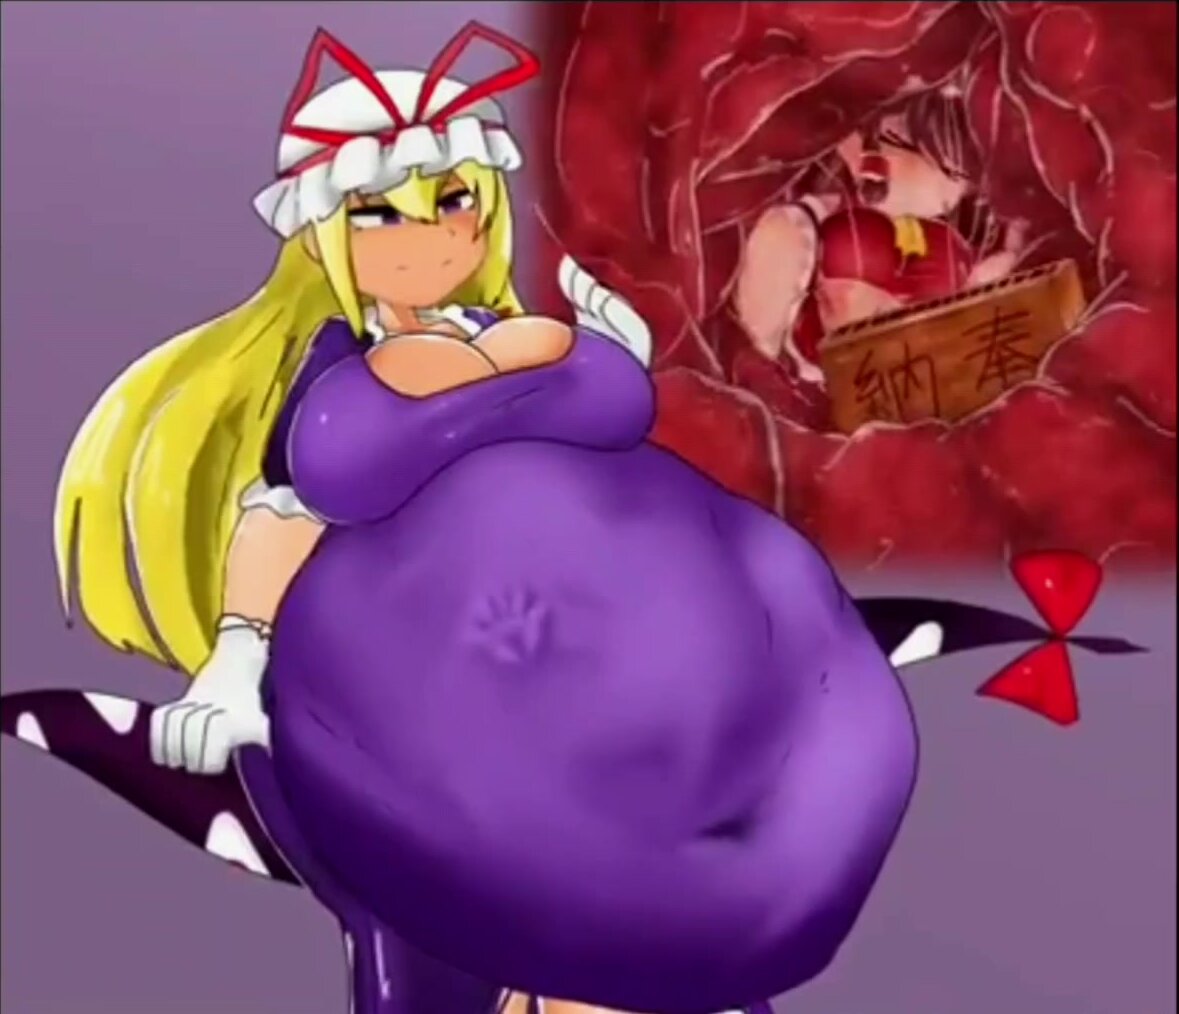 Touhou Project vore